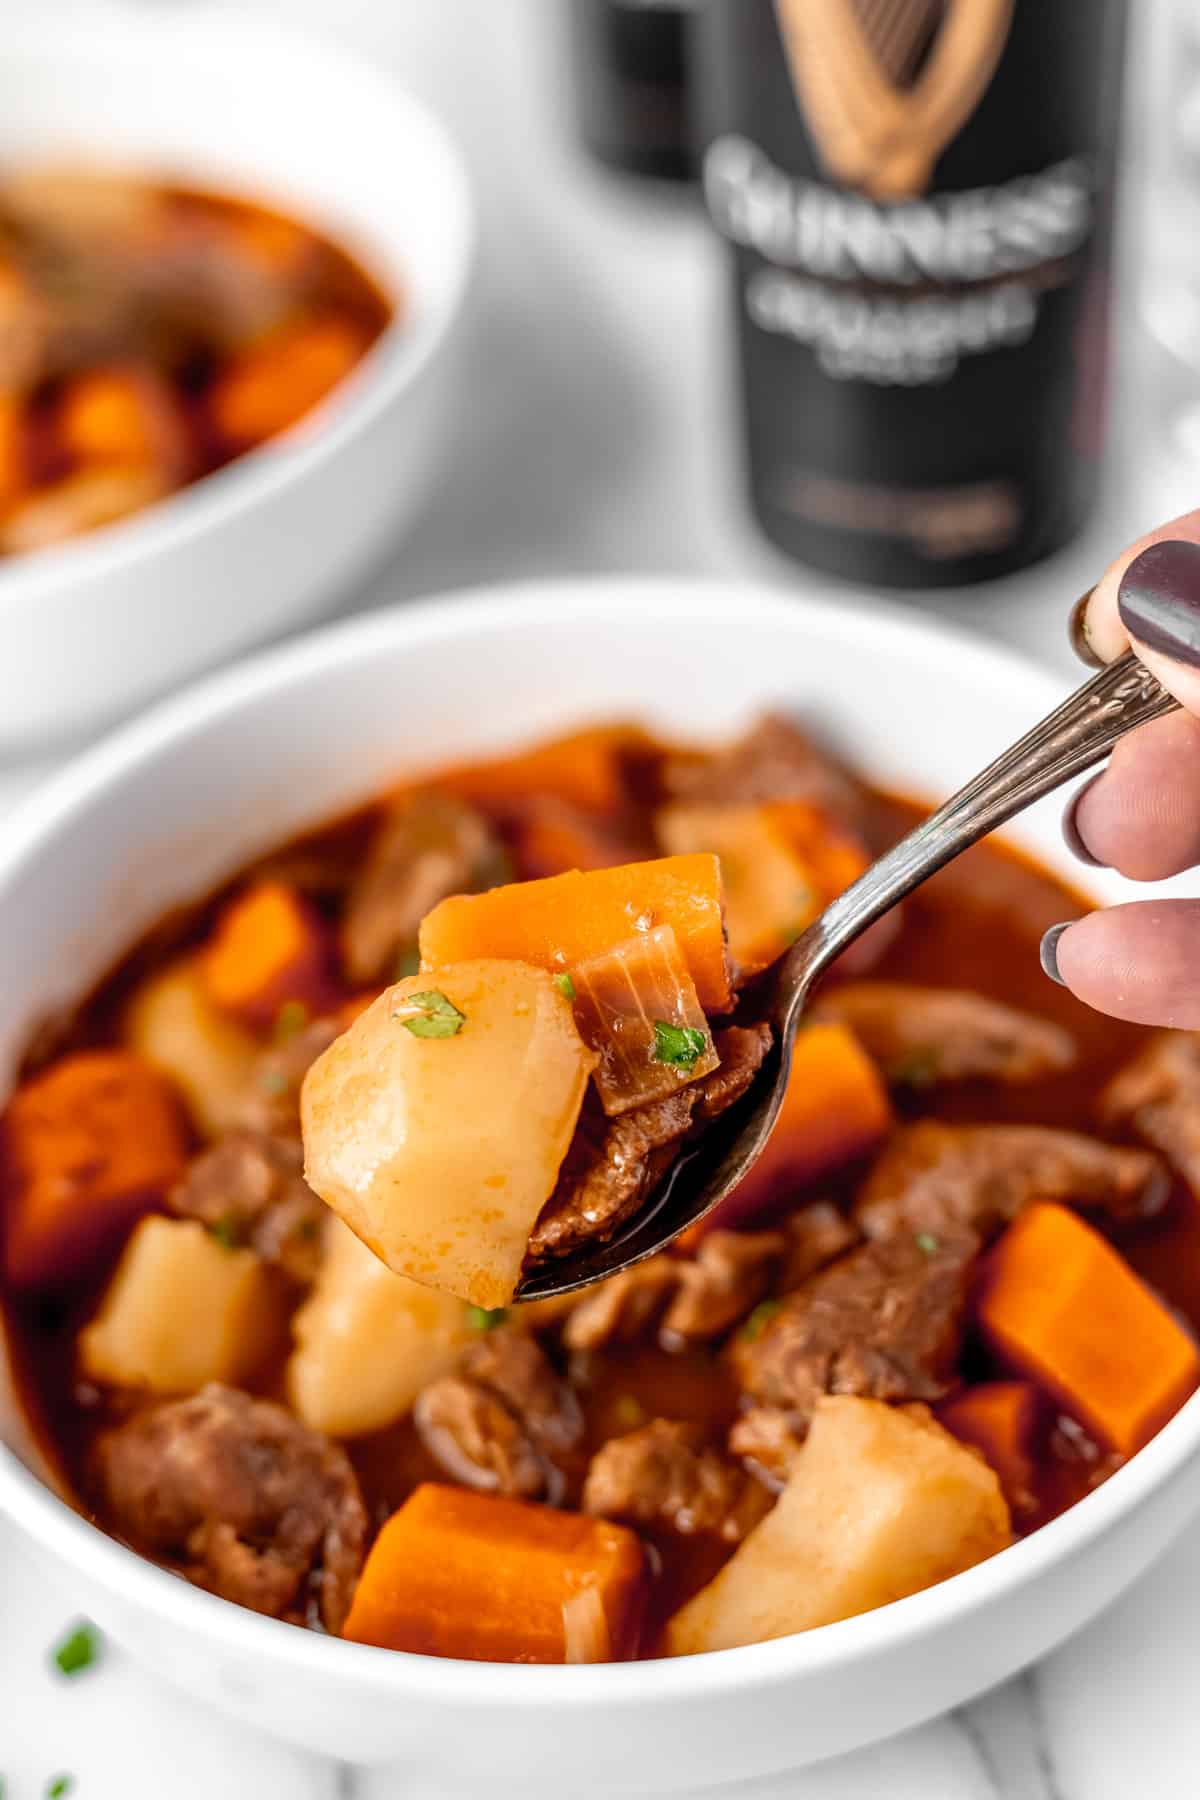 A spoonful of Guinness beef stew being held up in front of the bowl with a can of Guinness in the background.